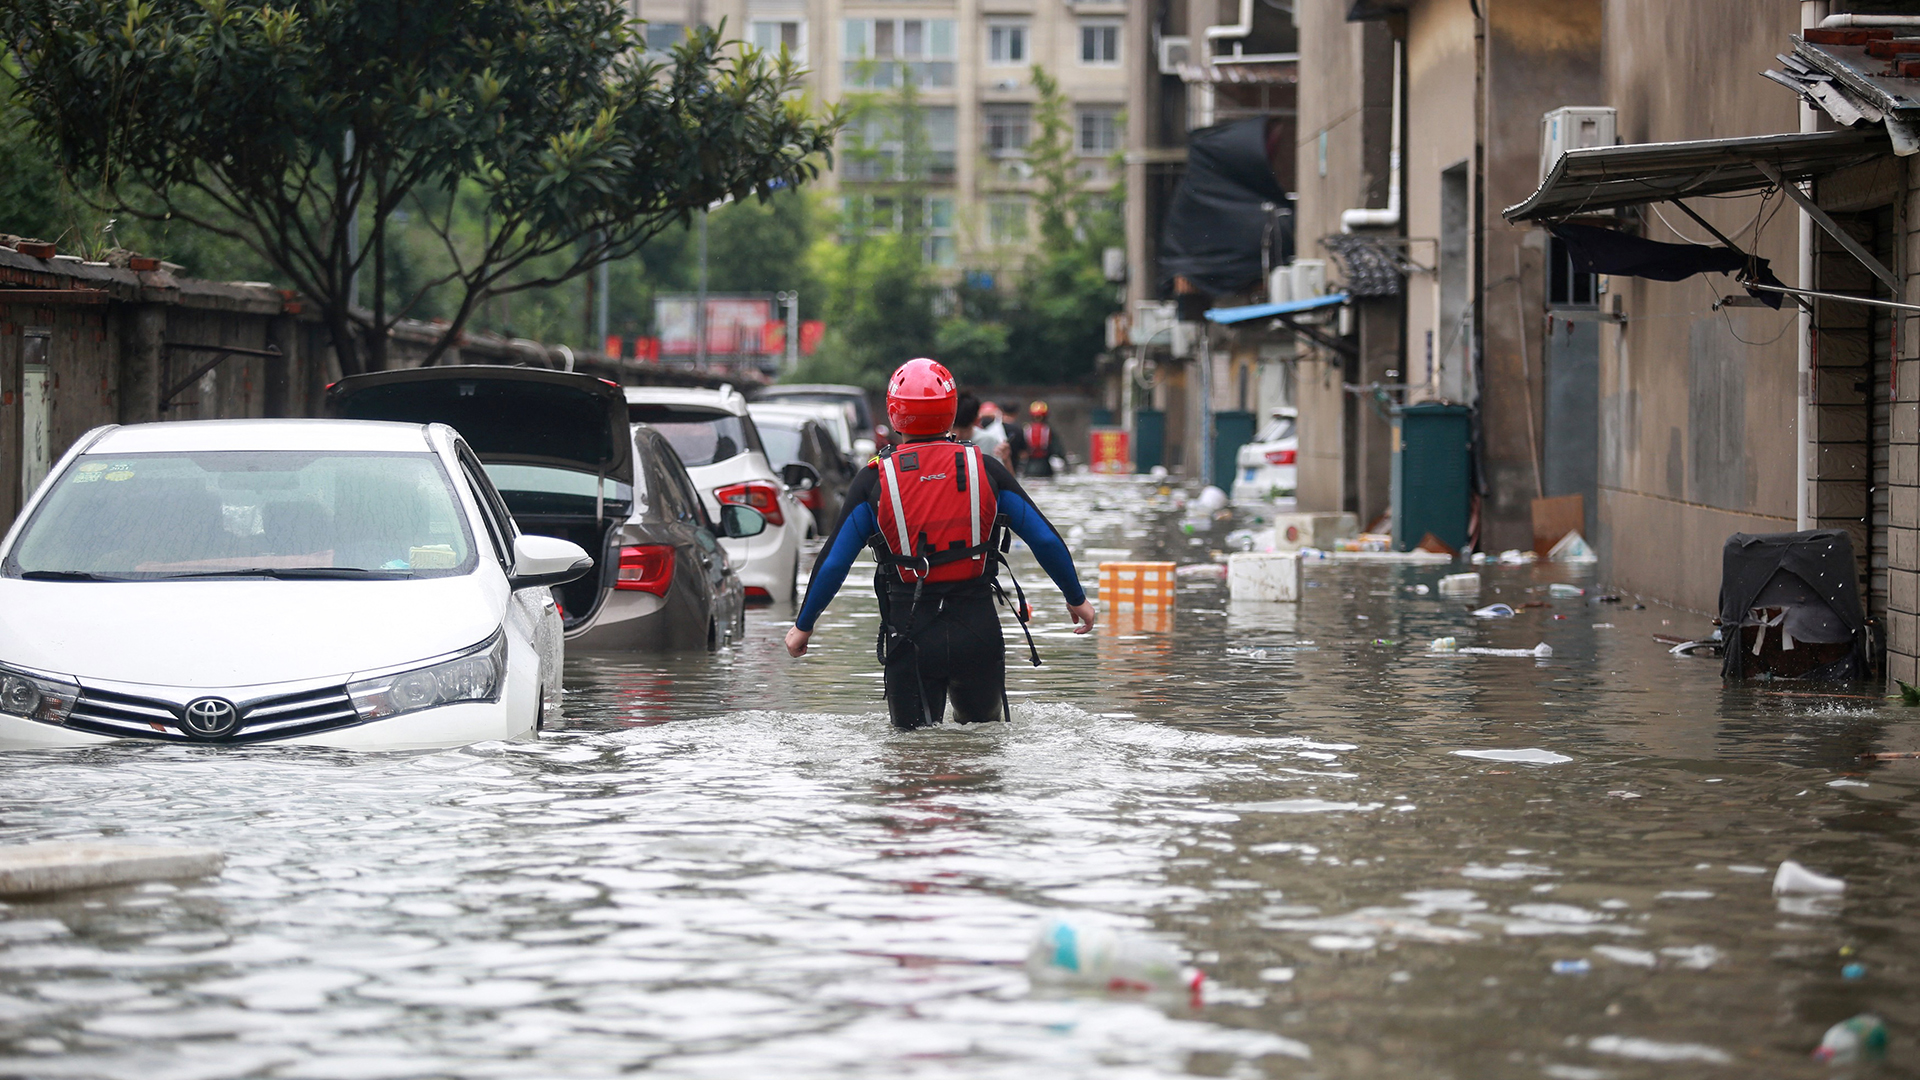 This photo taken on July 28 shows a rescuer walking down a flooded area in Yangzhou, east China's Jiangsu Province, after heavy rains caused by the passage of Typhoon In-Fa inundated China's east coast .